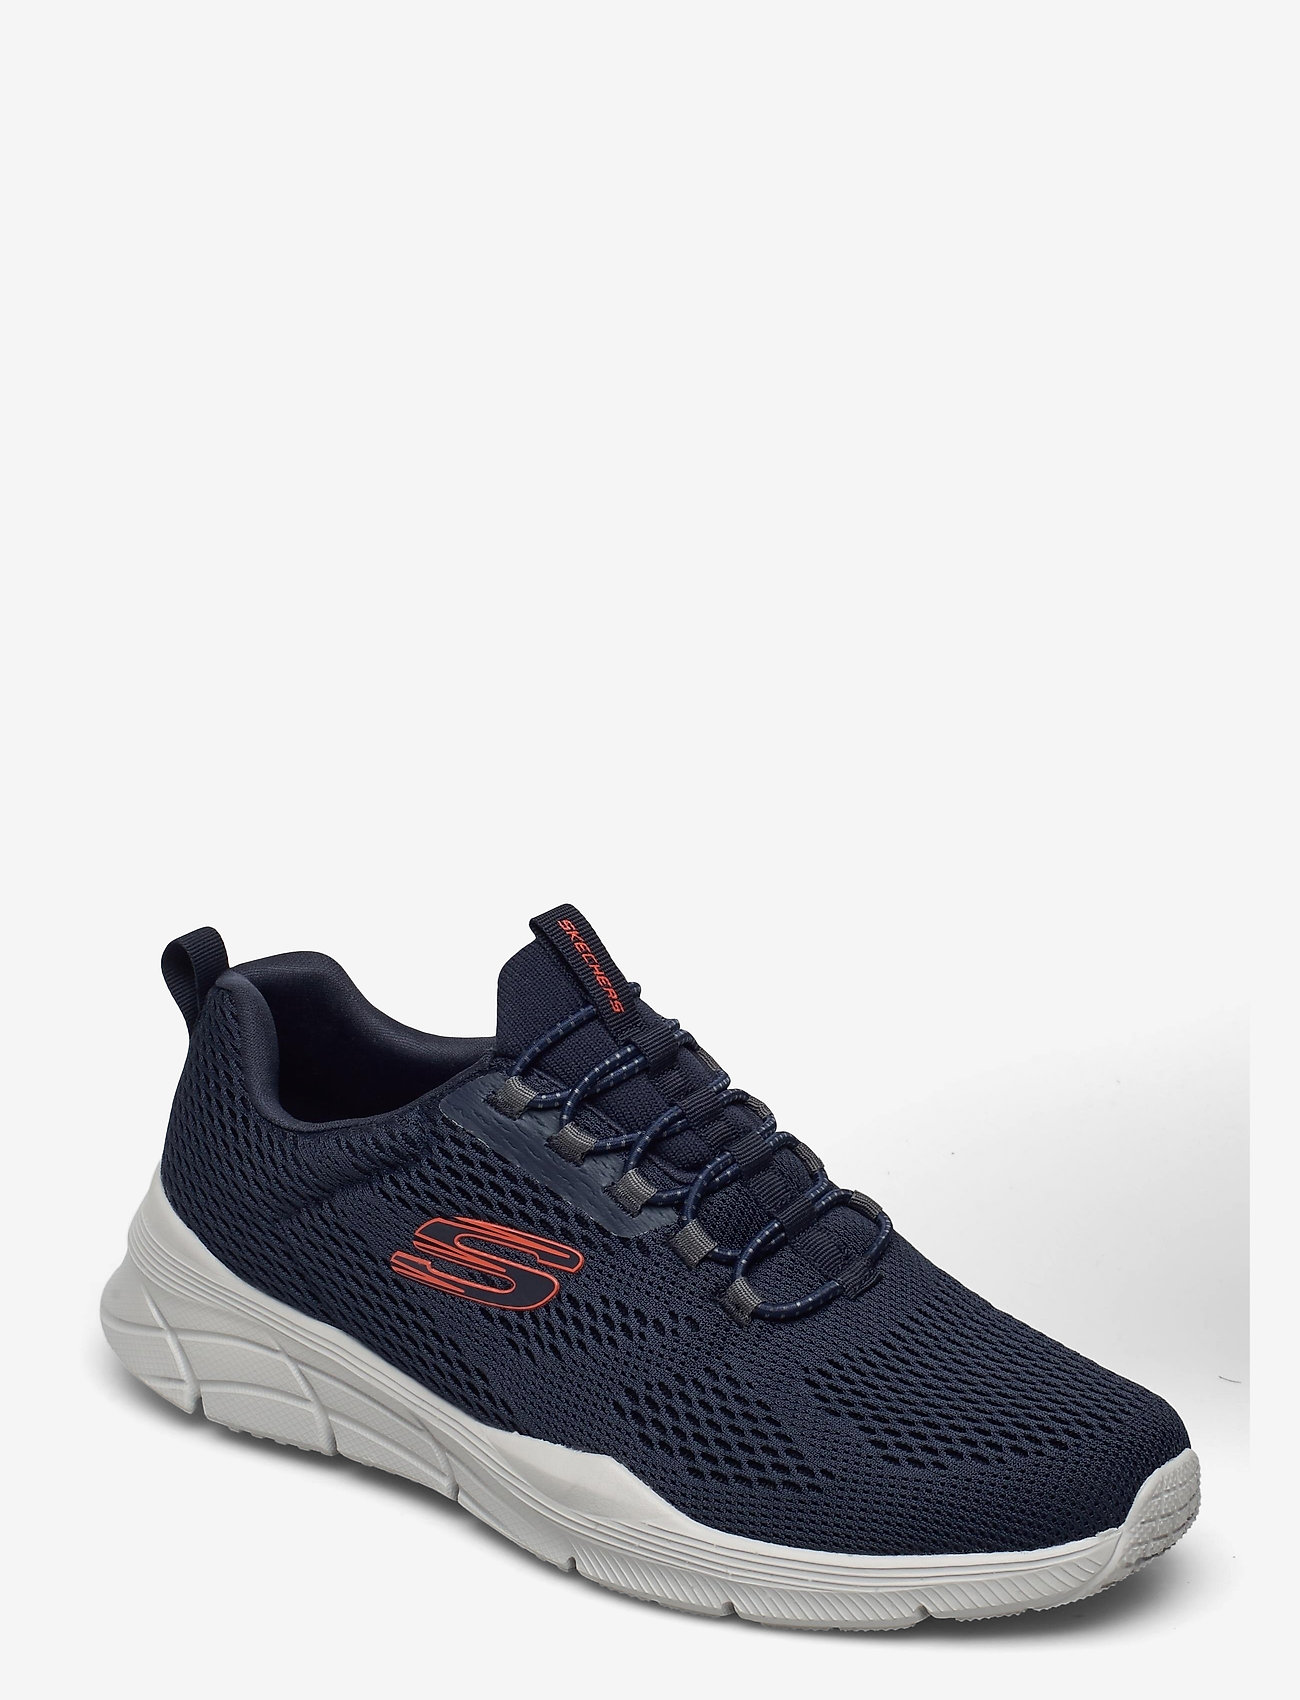 Skechers Mens Relaxed Fit: Equalizer 4.0 - Wraithern - Low Tops | Boozt.com